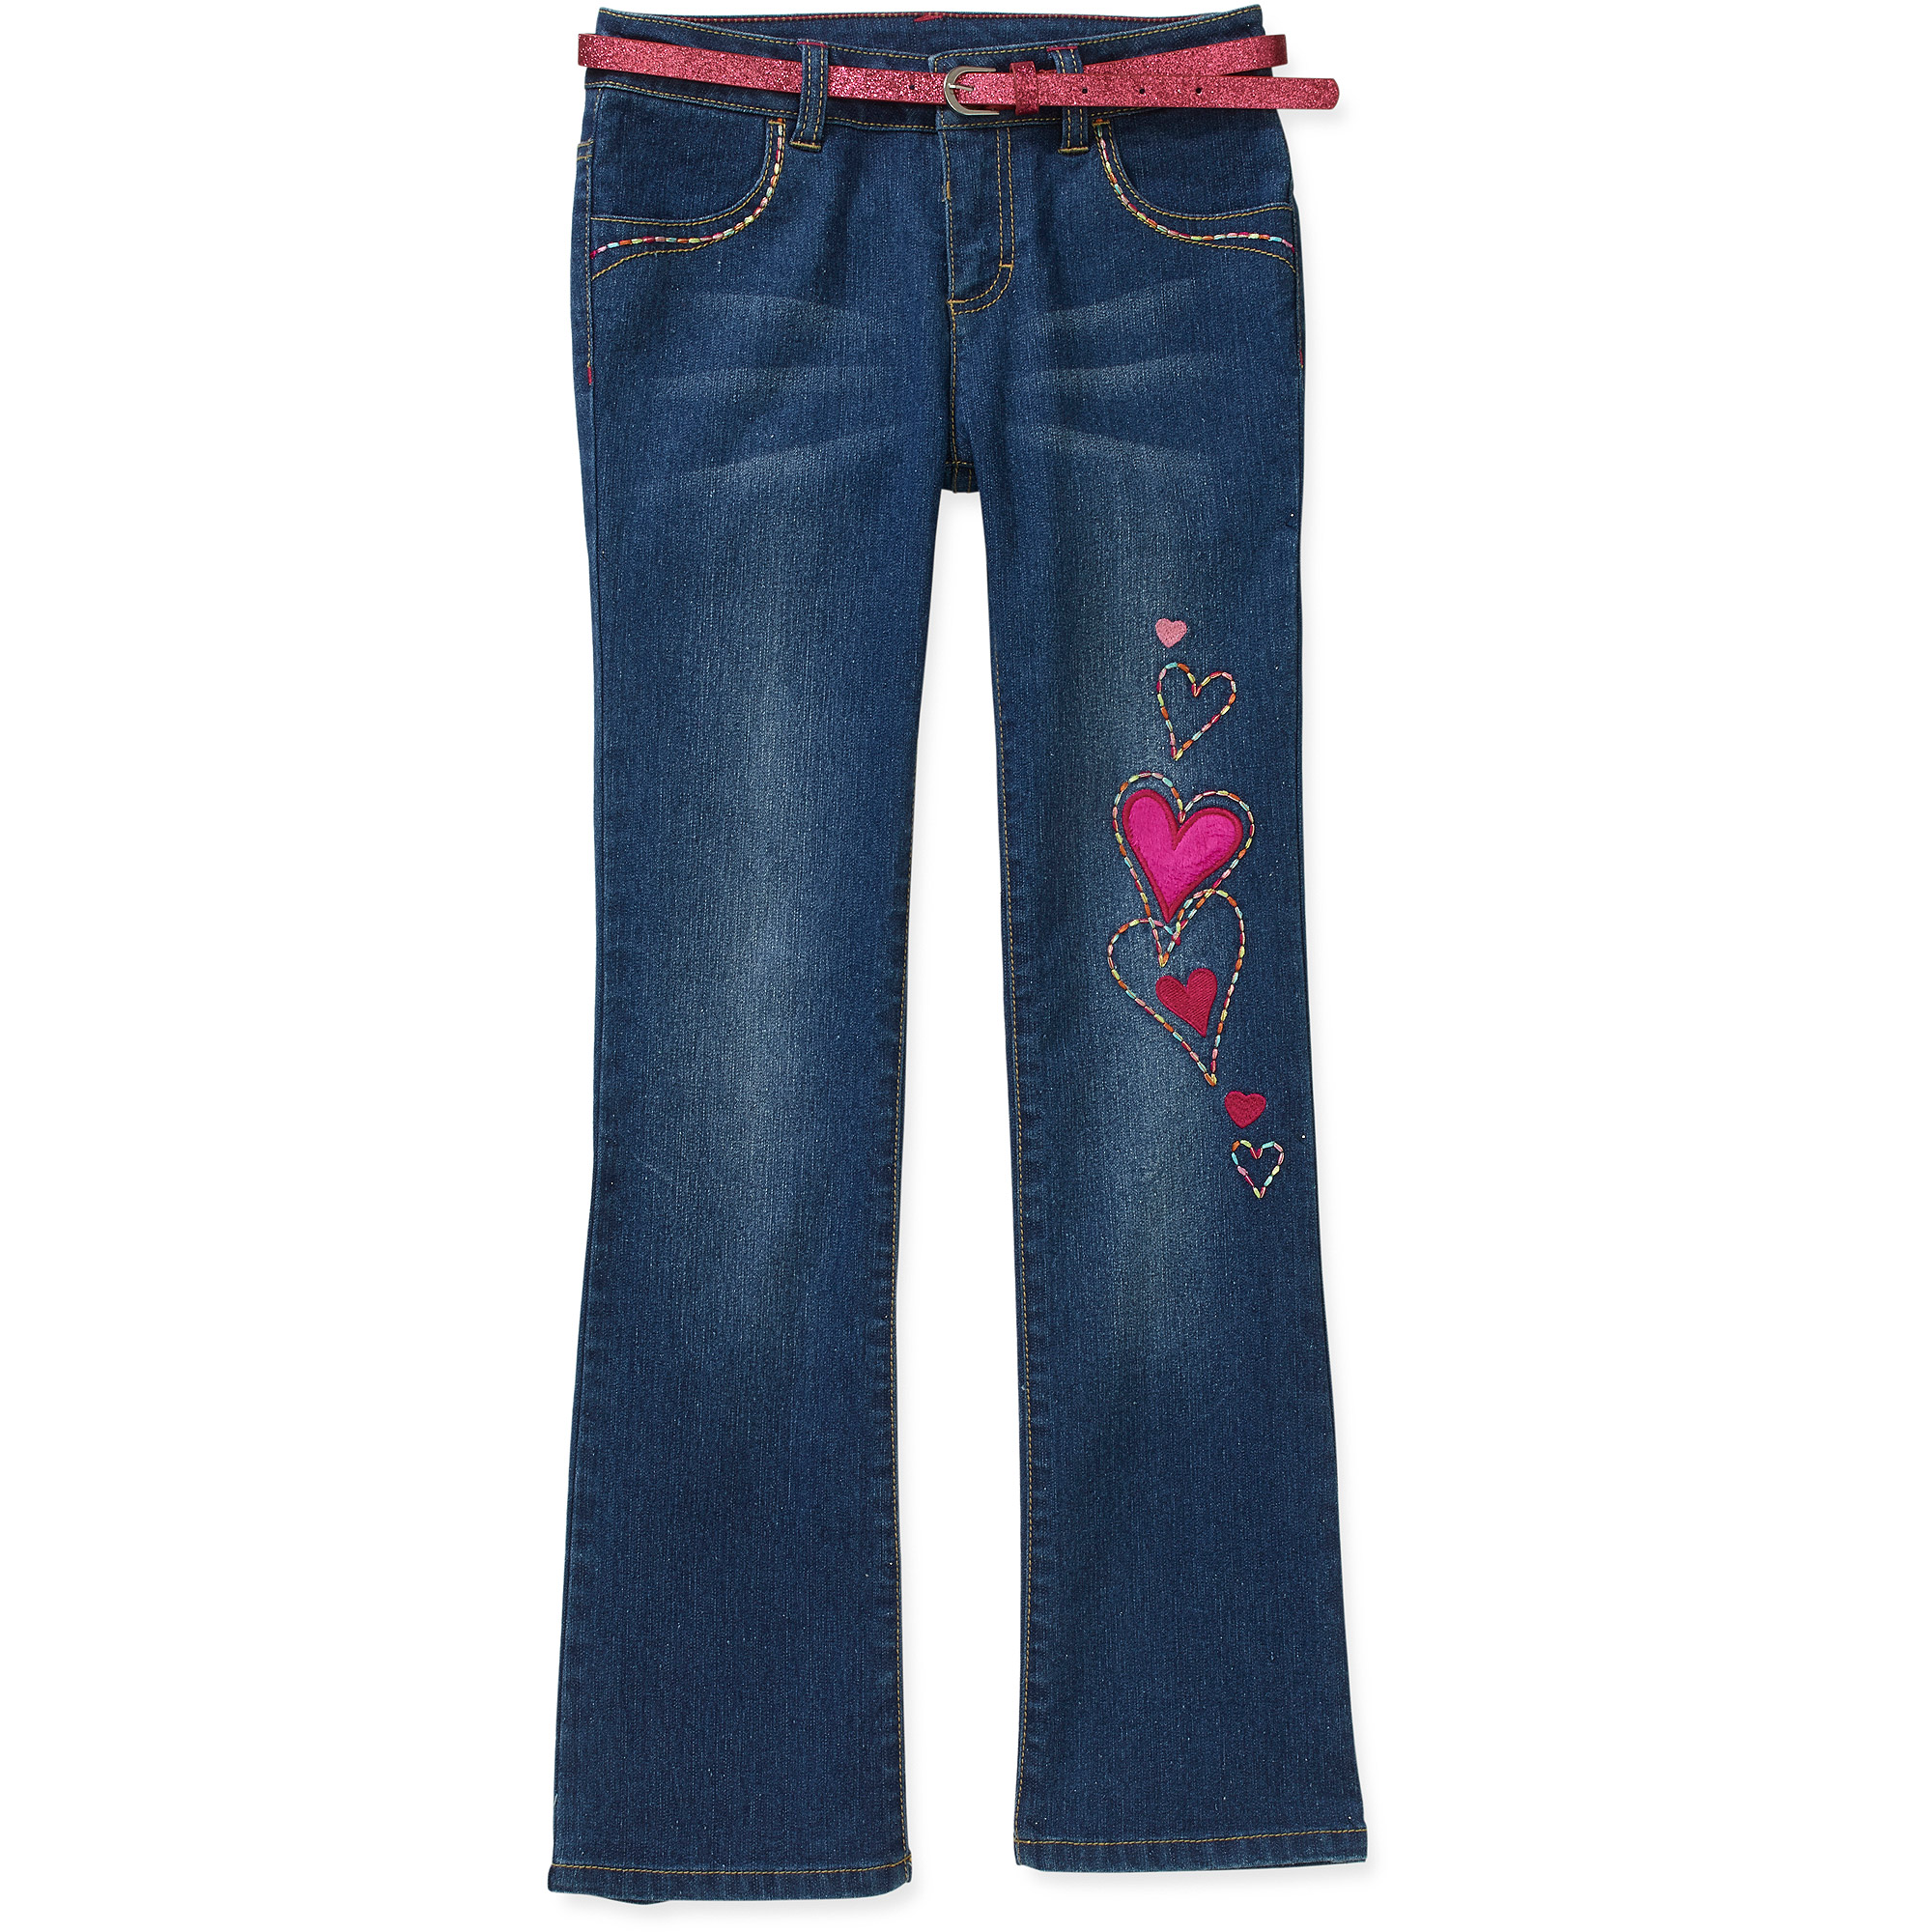 Faded Glory Girls' Embellished Belted Bootcut Denim Jeans - image 1 of 2